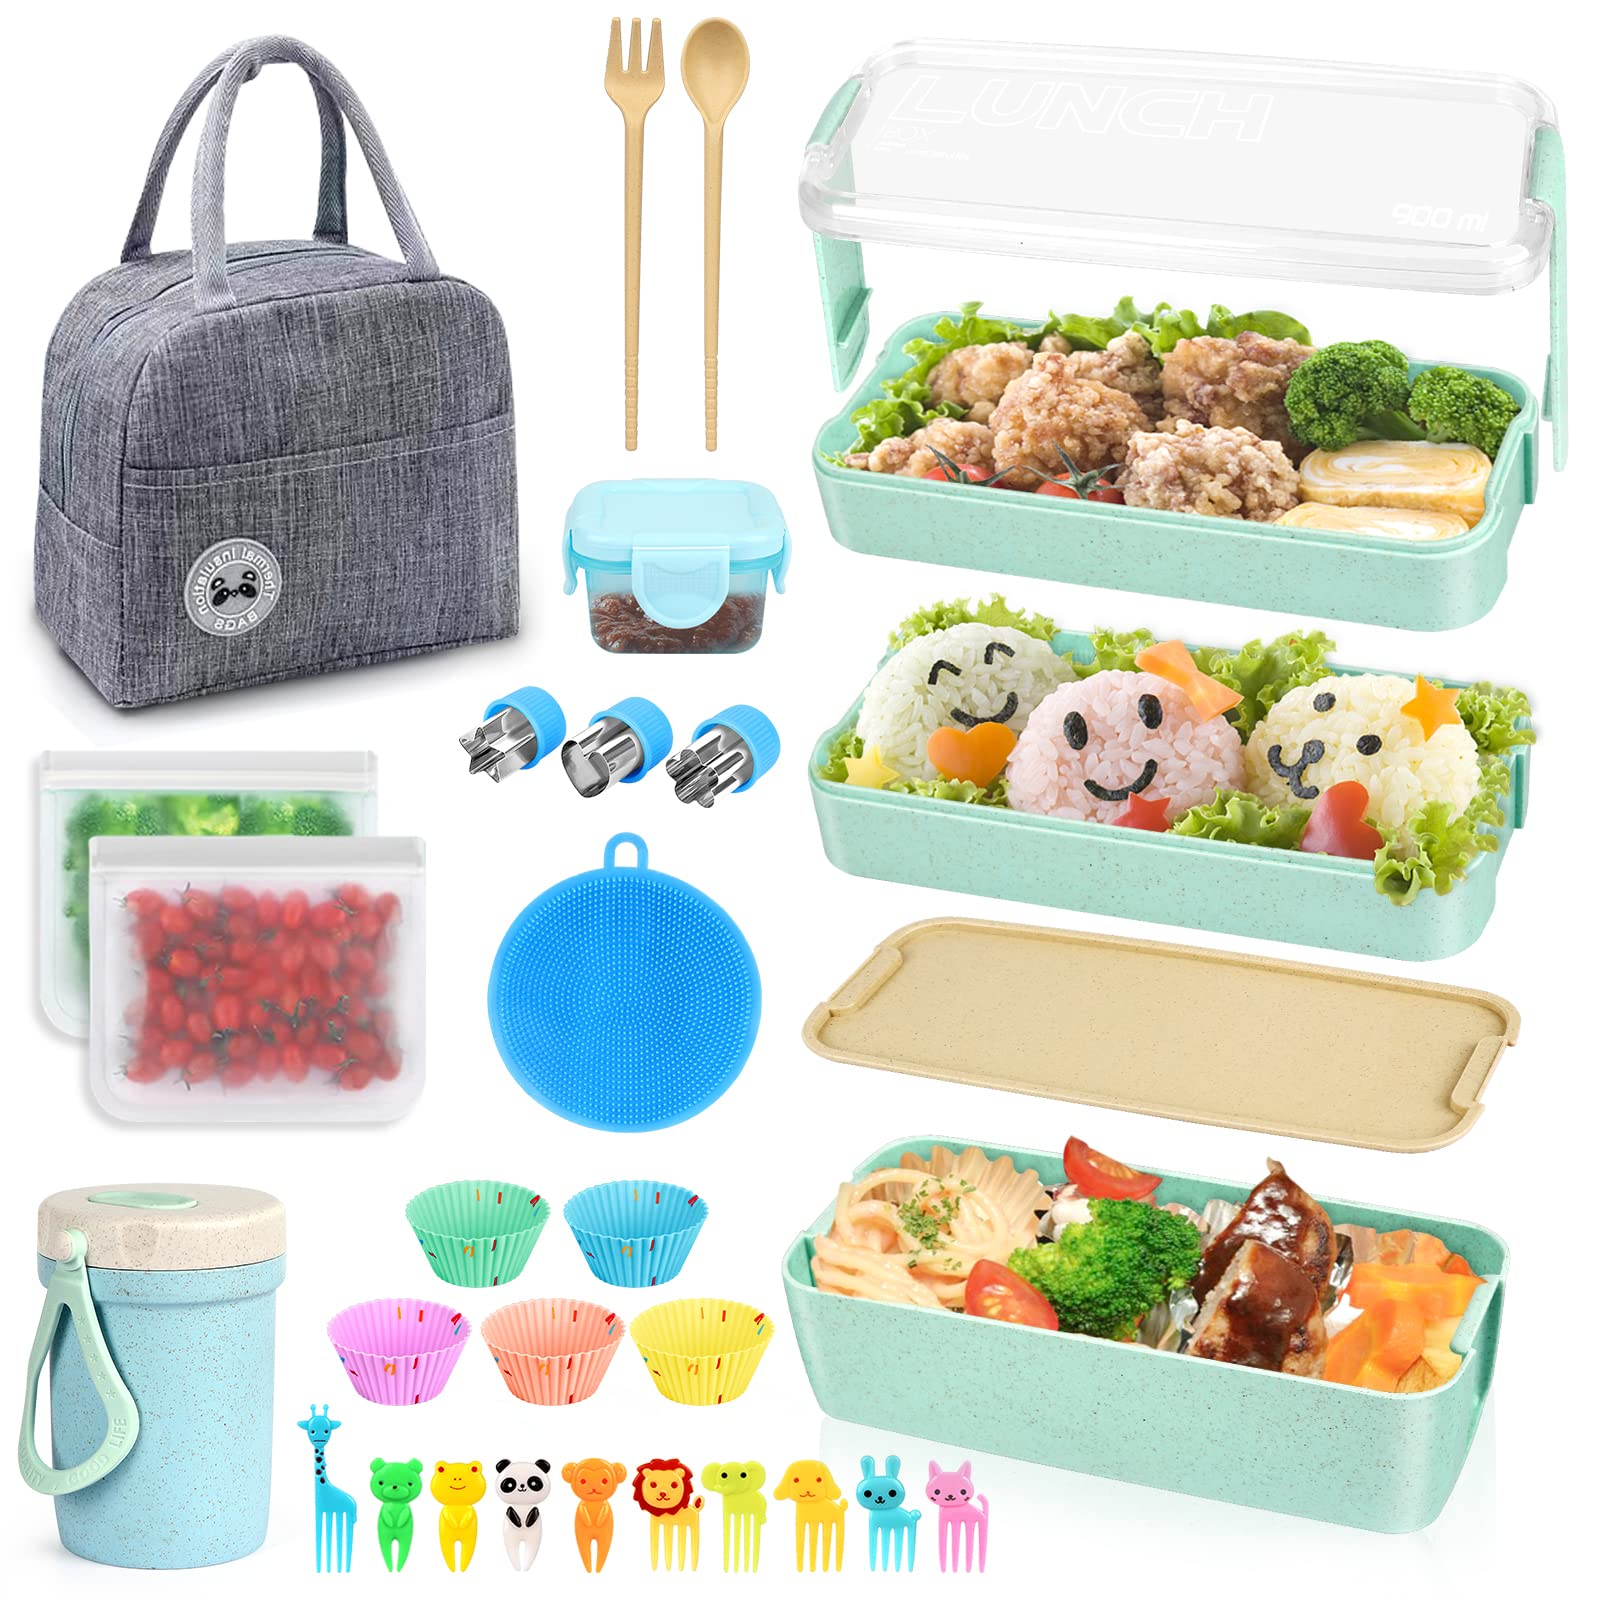 All-in-One Bento Box  Bento box, Bento boxes containers, Food